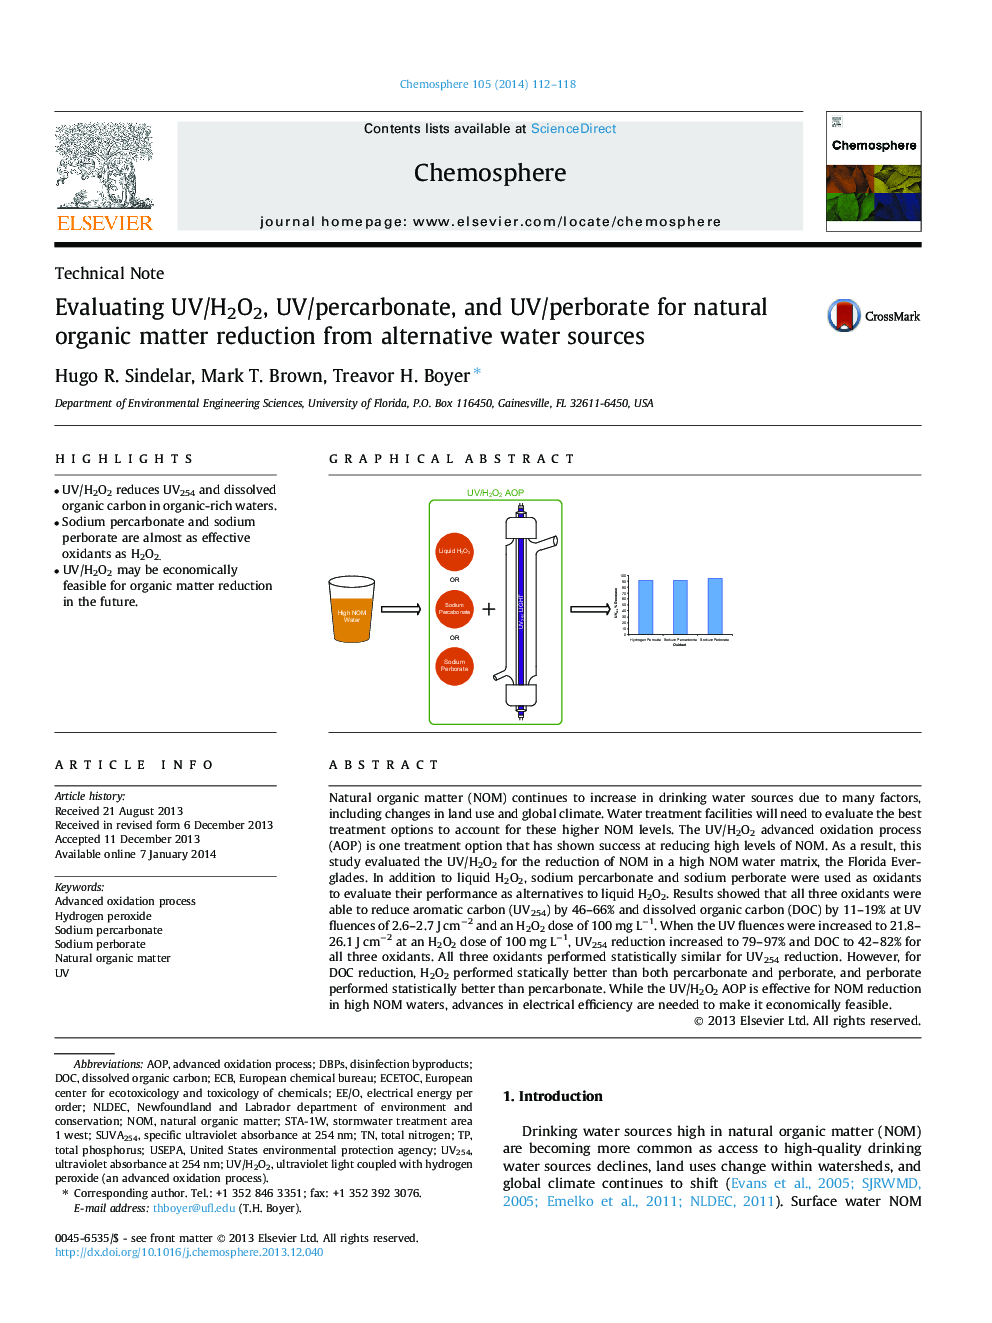 Evaluating UV/H2O2, UV/percarbonate, and UV/perborate for natural organic matter reduction from alternative water sources